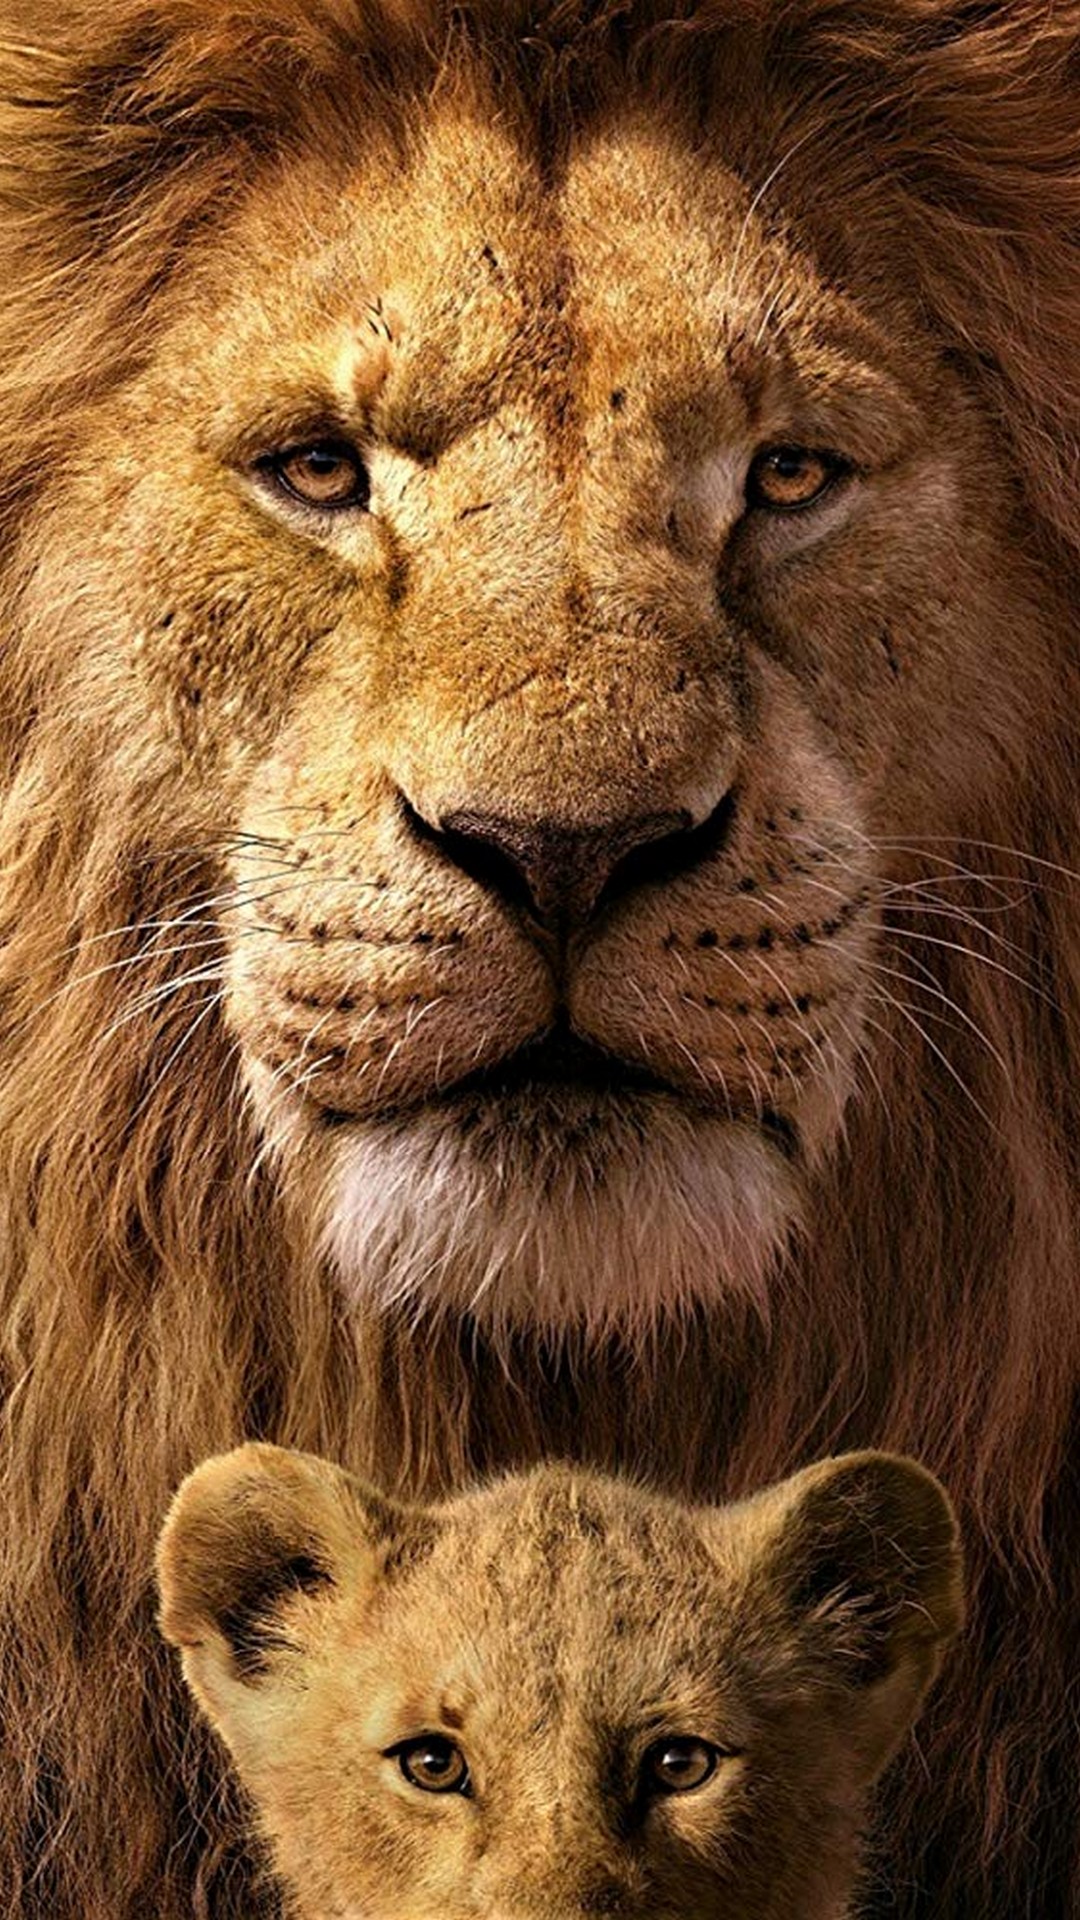 The Lion King Iphone 6 Wallpaper With High-resolution - Lion King 2019 Simba And Mufasa - HD Wallpaper 